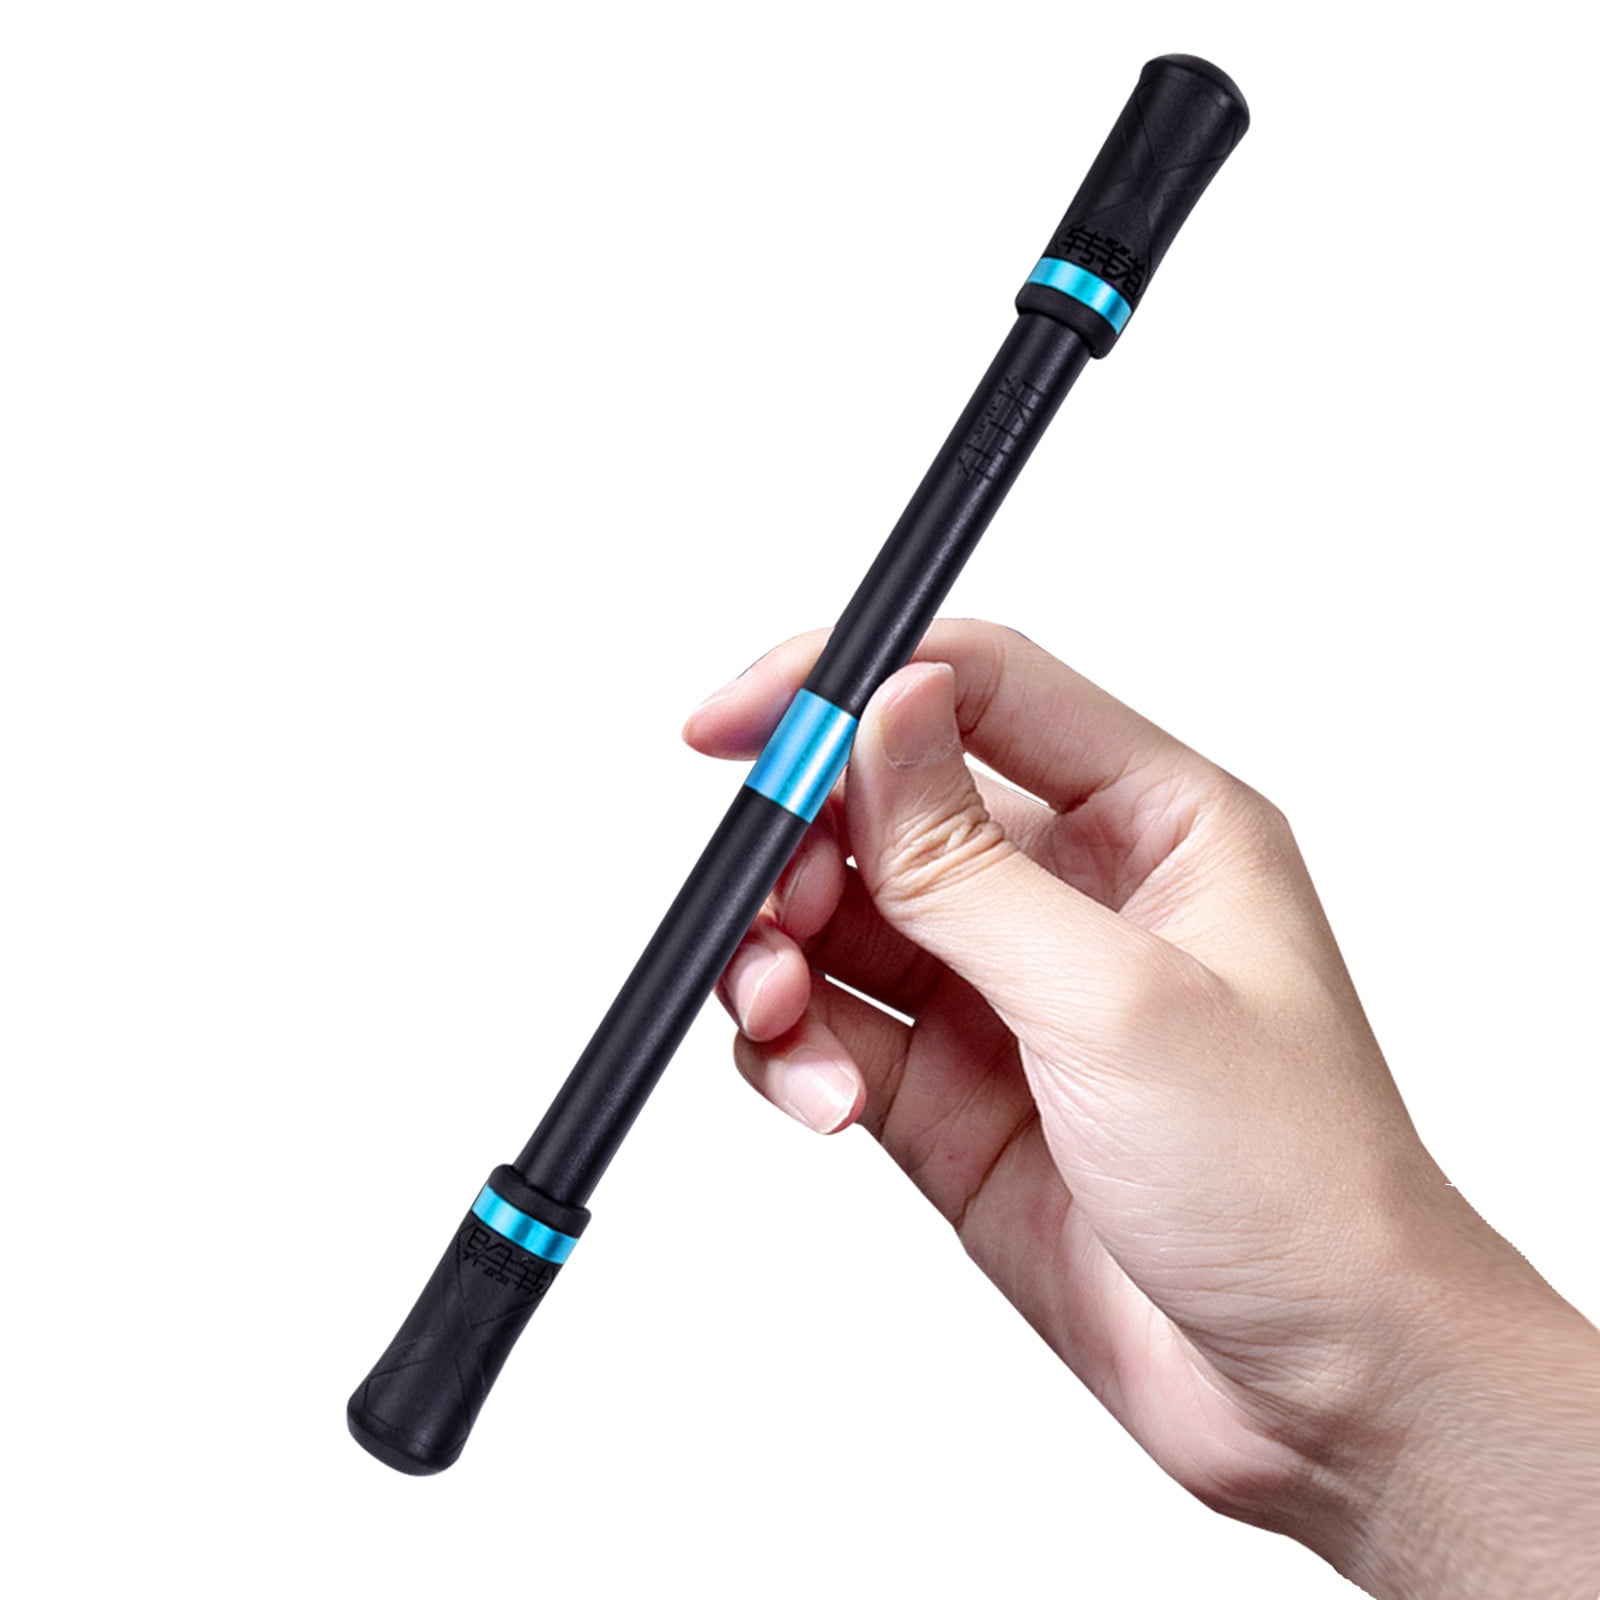 TUTUnaumb 3ml Thumb Turning Pen Spinning Pen Rollers Finger Rotating Pen  Gaming Trick Pen Mod with Tutorial Stress Releasing Brain Training Toys for